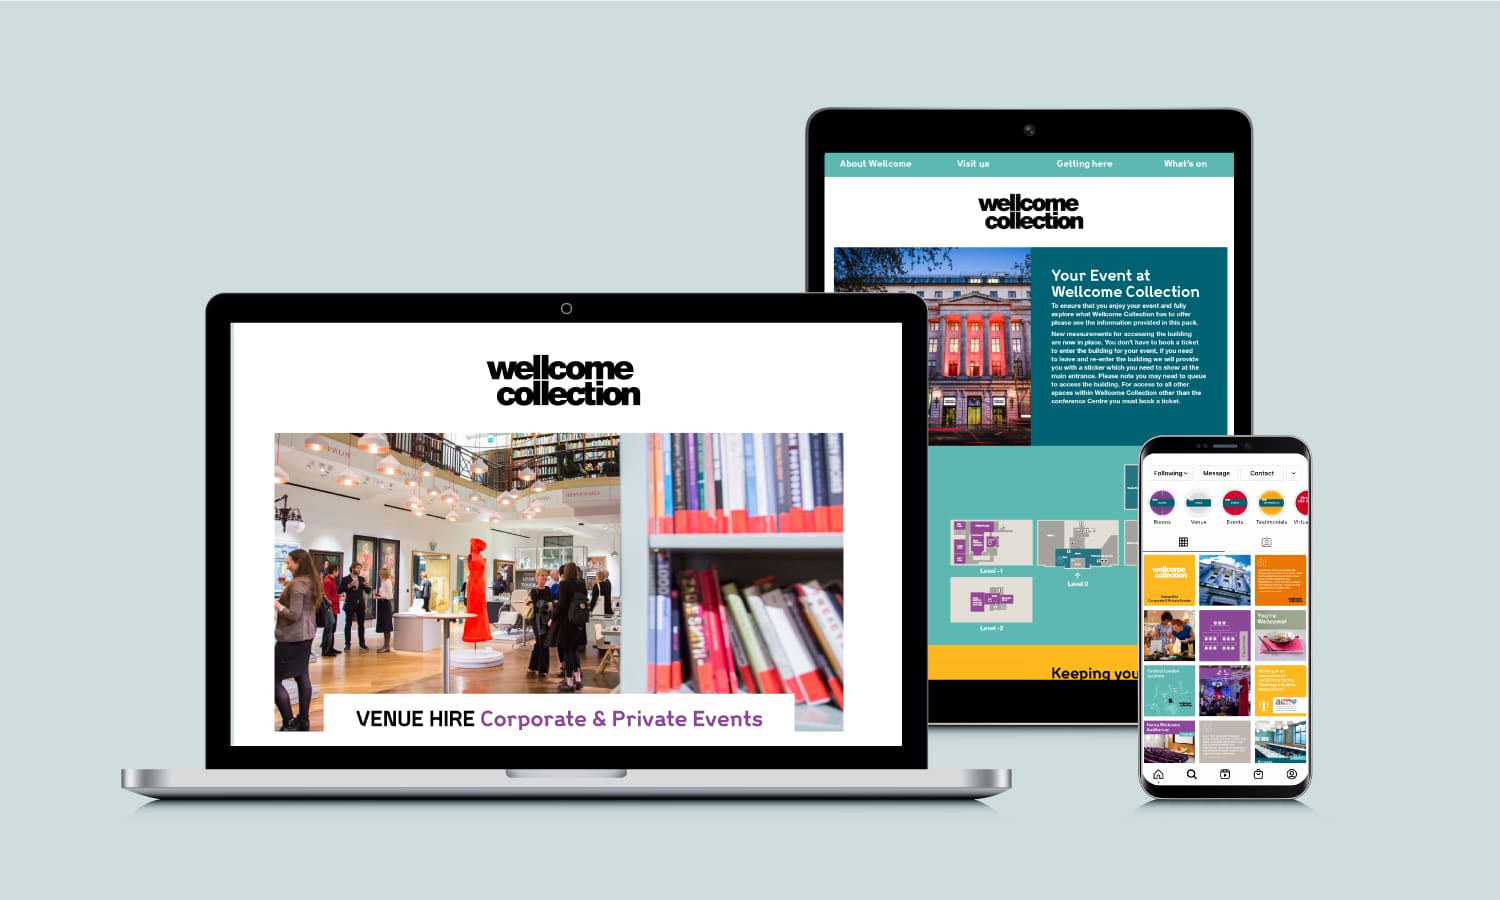 Wellcome Collection Venue Hire brand guidelines and templates